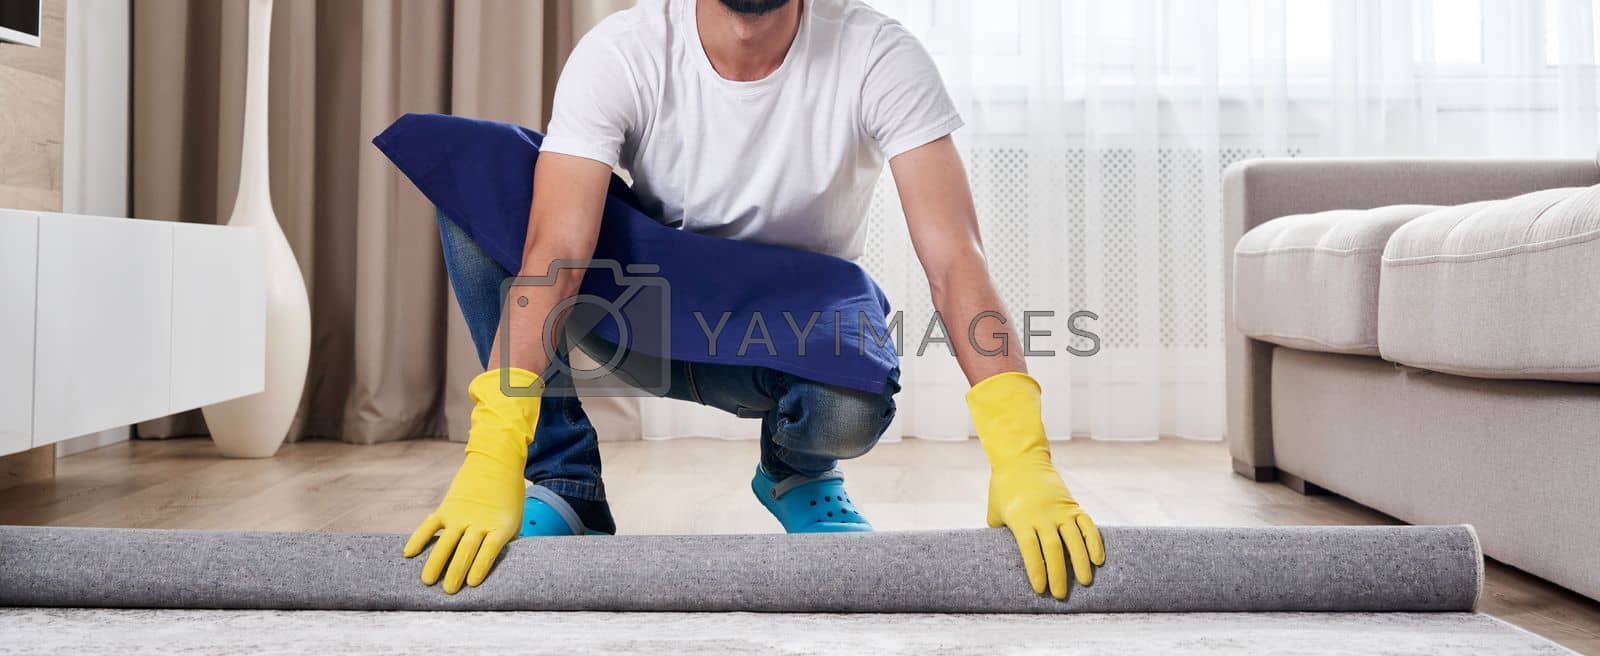 Royalty free image of Close up of man unrolling carpet. Cleaning service concept by Mariakray